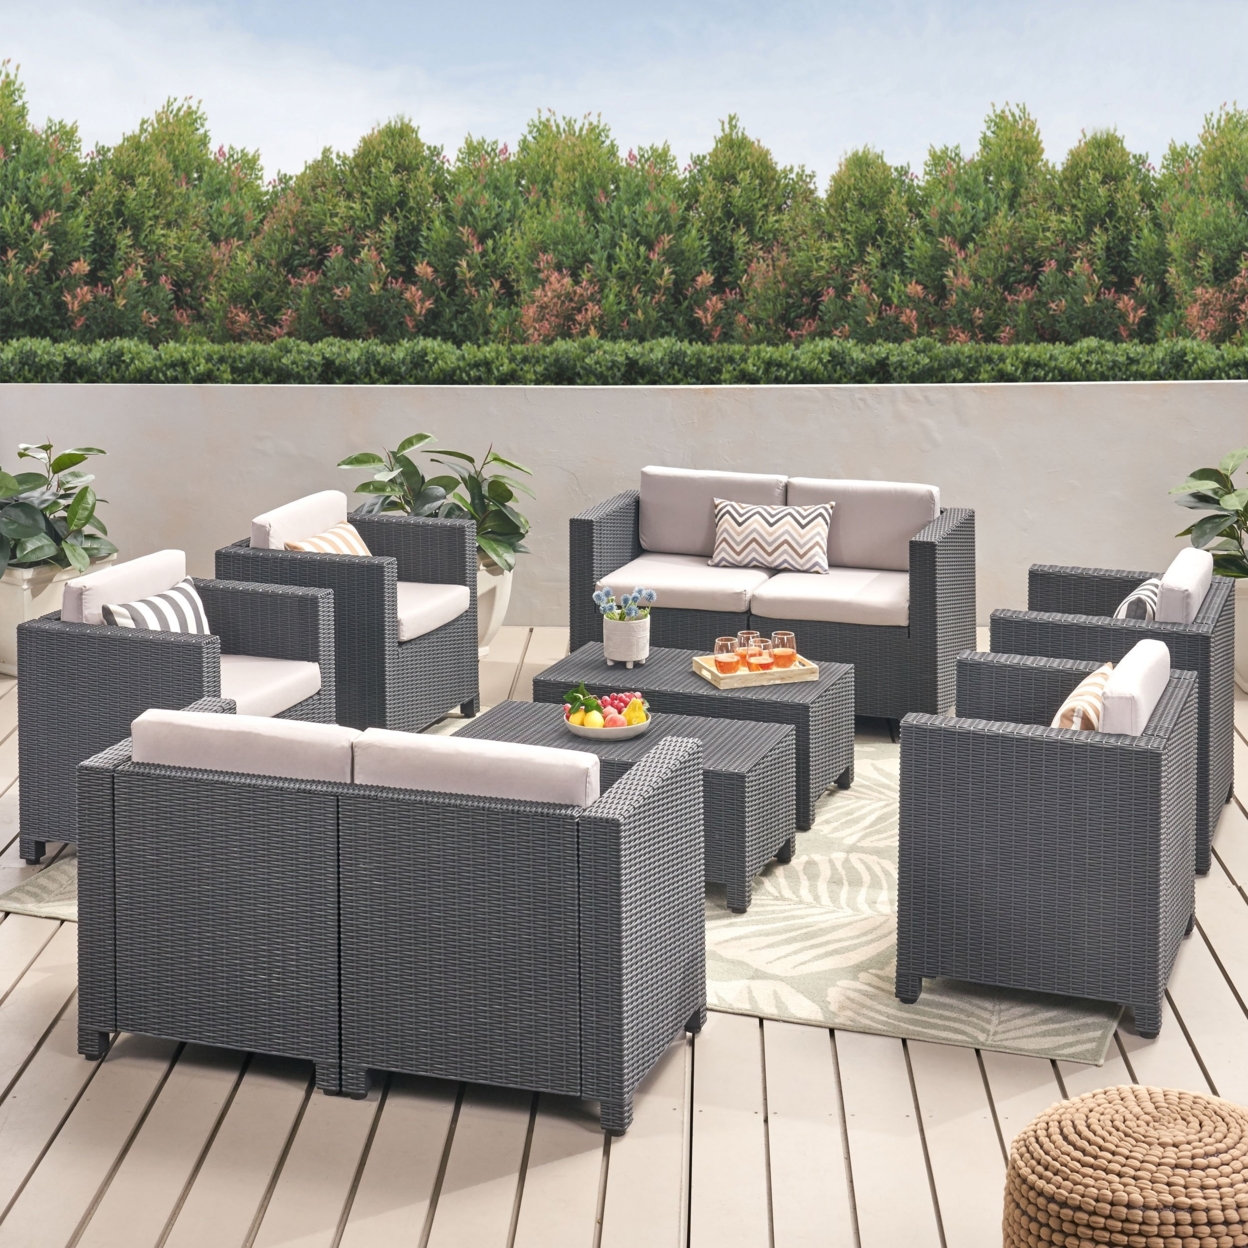 Farirra Outdoor Faux Wicker 8 Seater Chat Set With Cushions - Dark Gray/gray